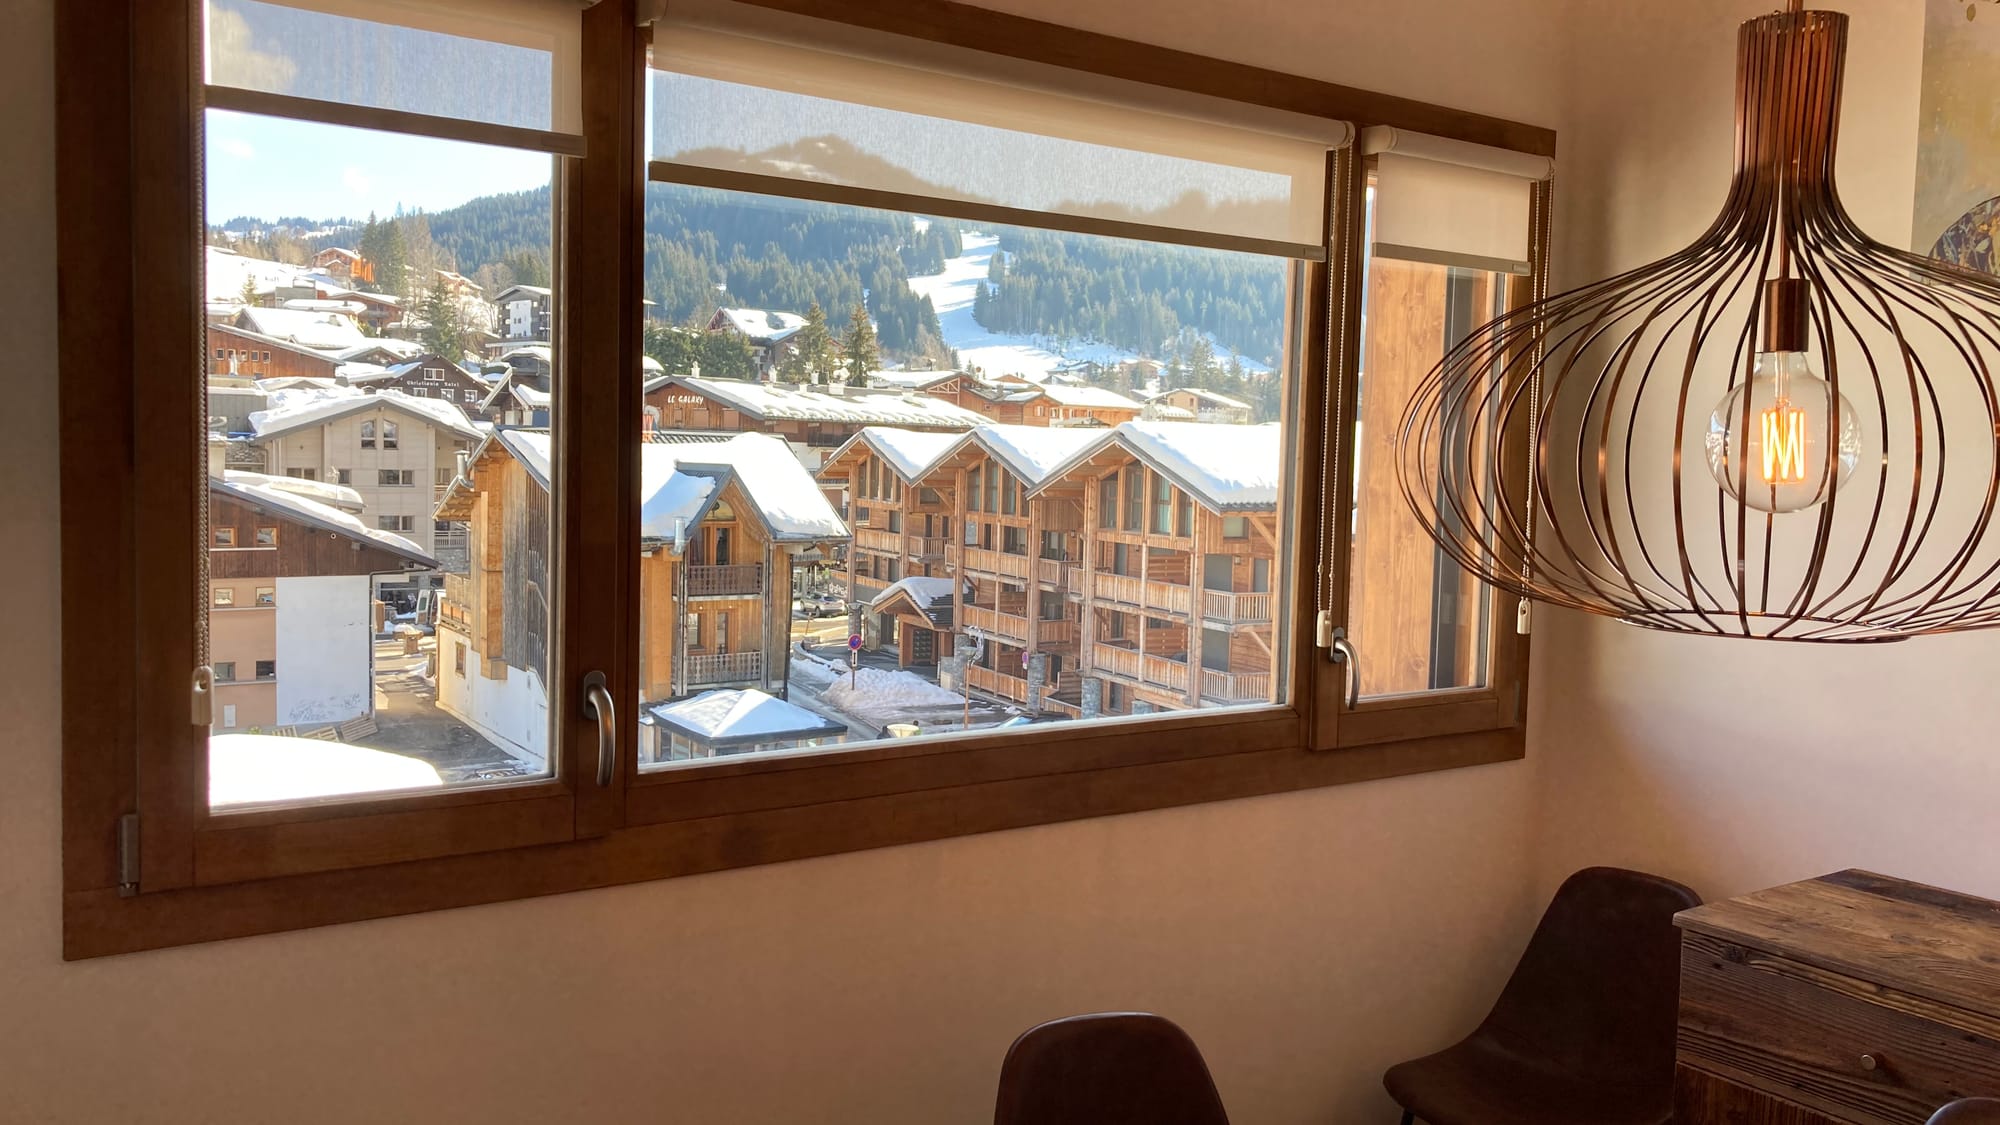 View from open-kitchen on snowy village